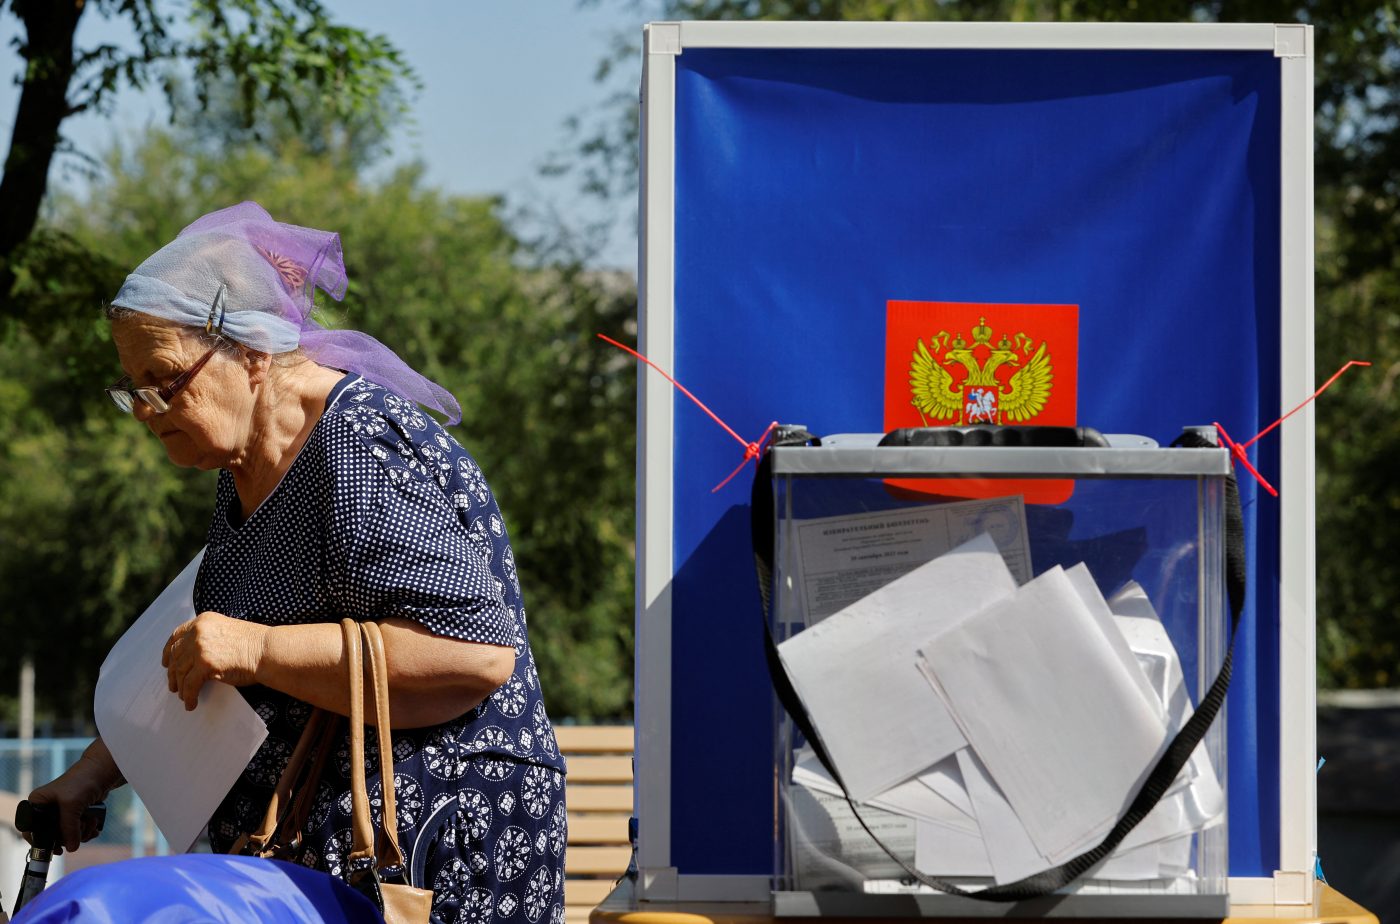 Photo: A voter visits a mobile polling station during local elections held by the Russian-installed authorities in the course of Russia-Ukraine conflict in the city of Mariupol, Russian-controlled Ukraine, August 31, 2023. Credit: REUTERS/Alexander Ermochenko